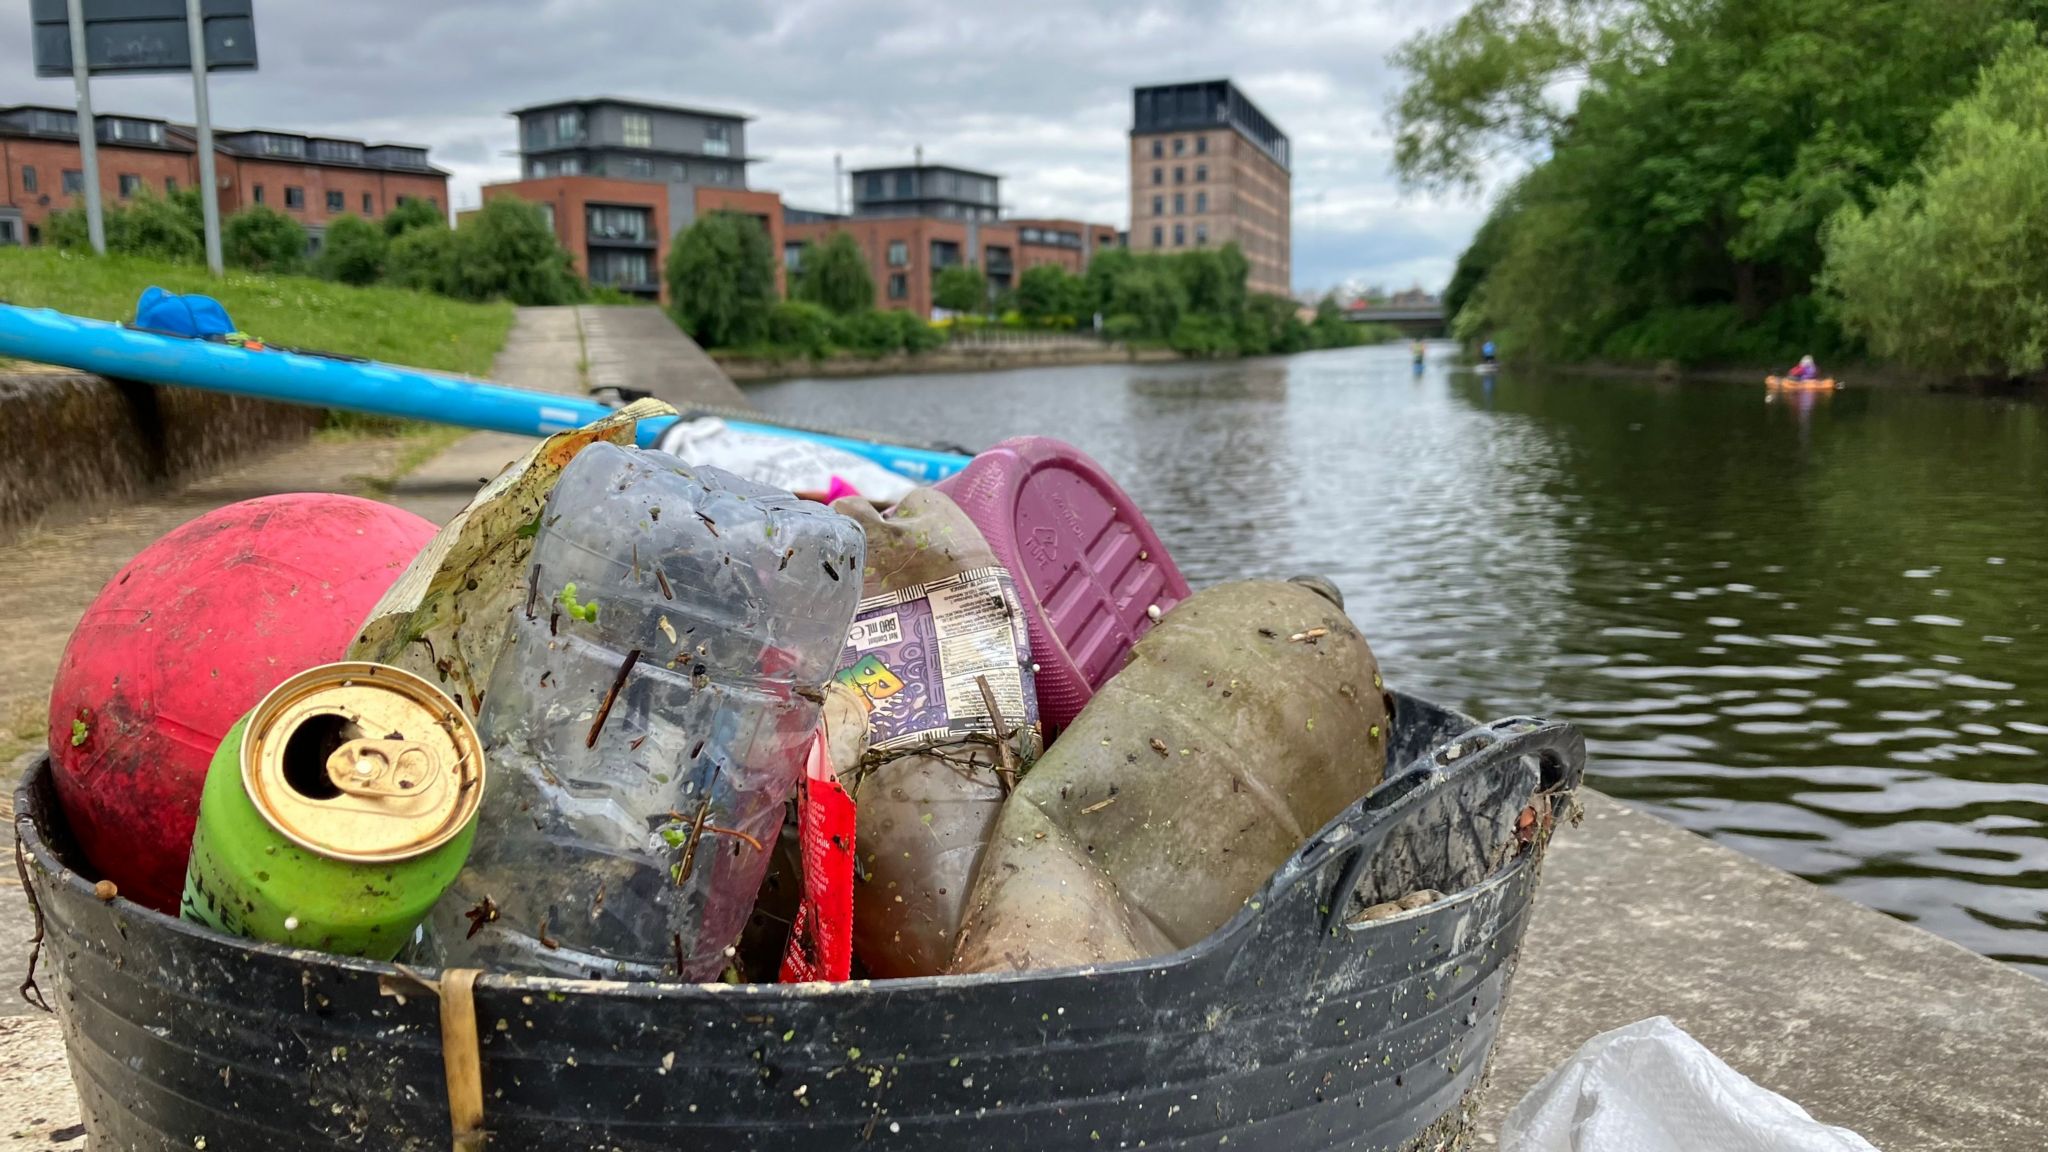 Rubbish removed from the river